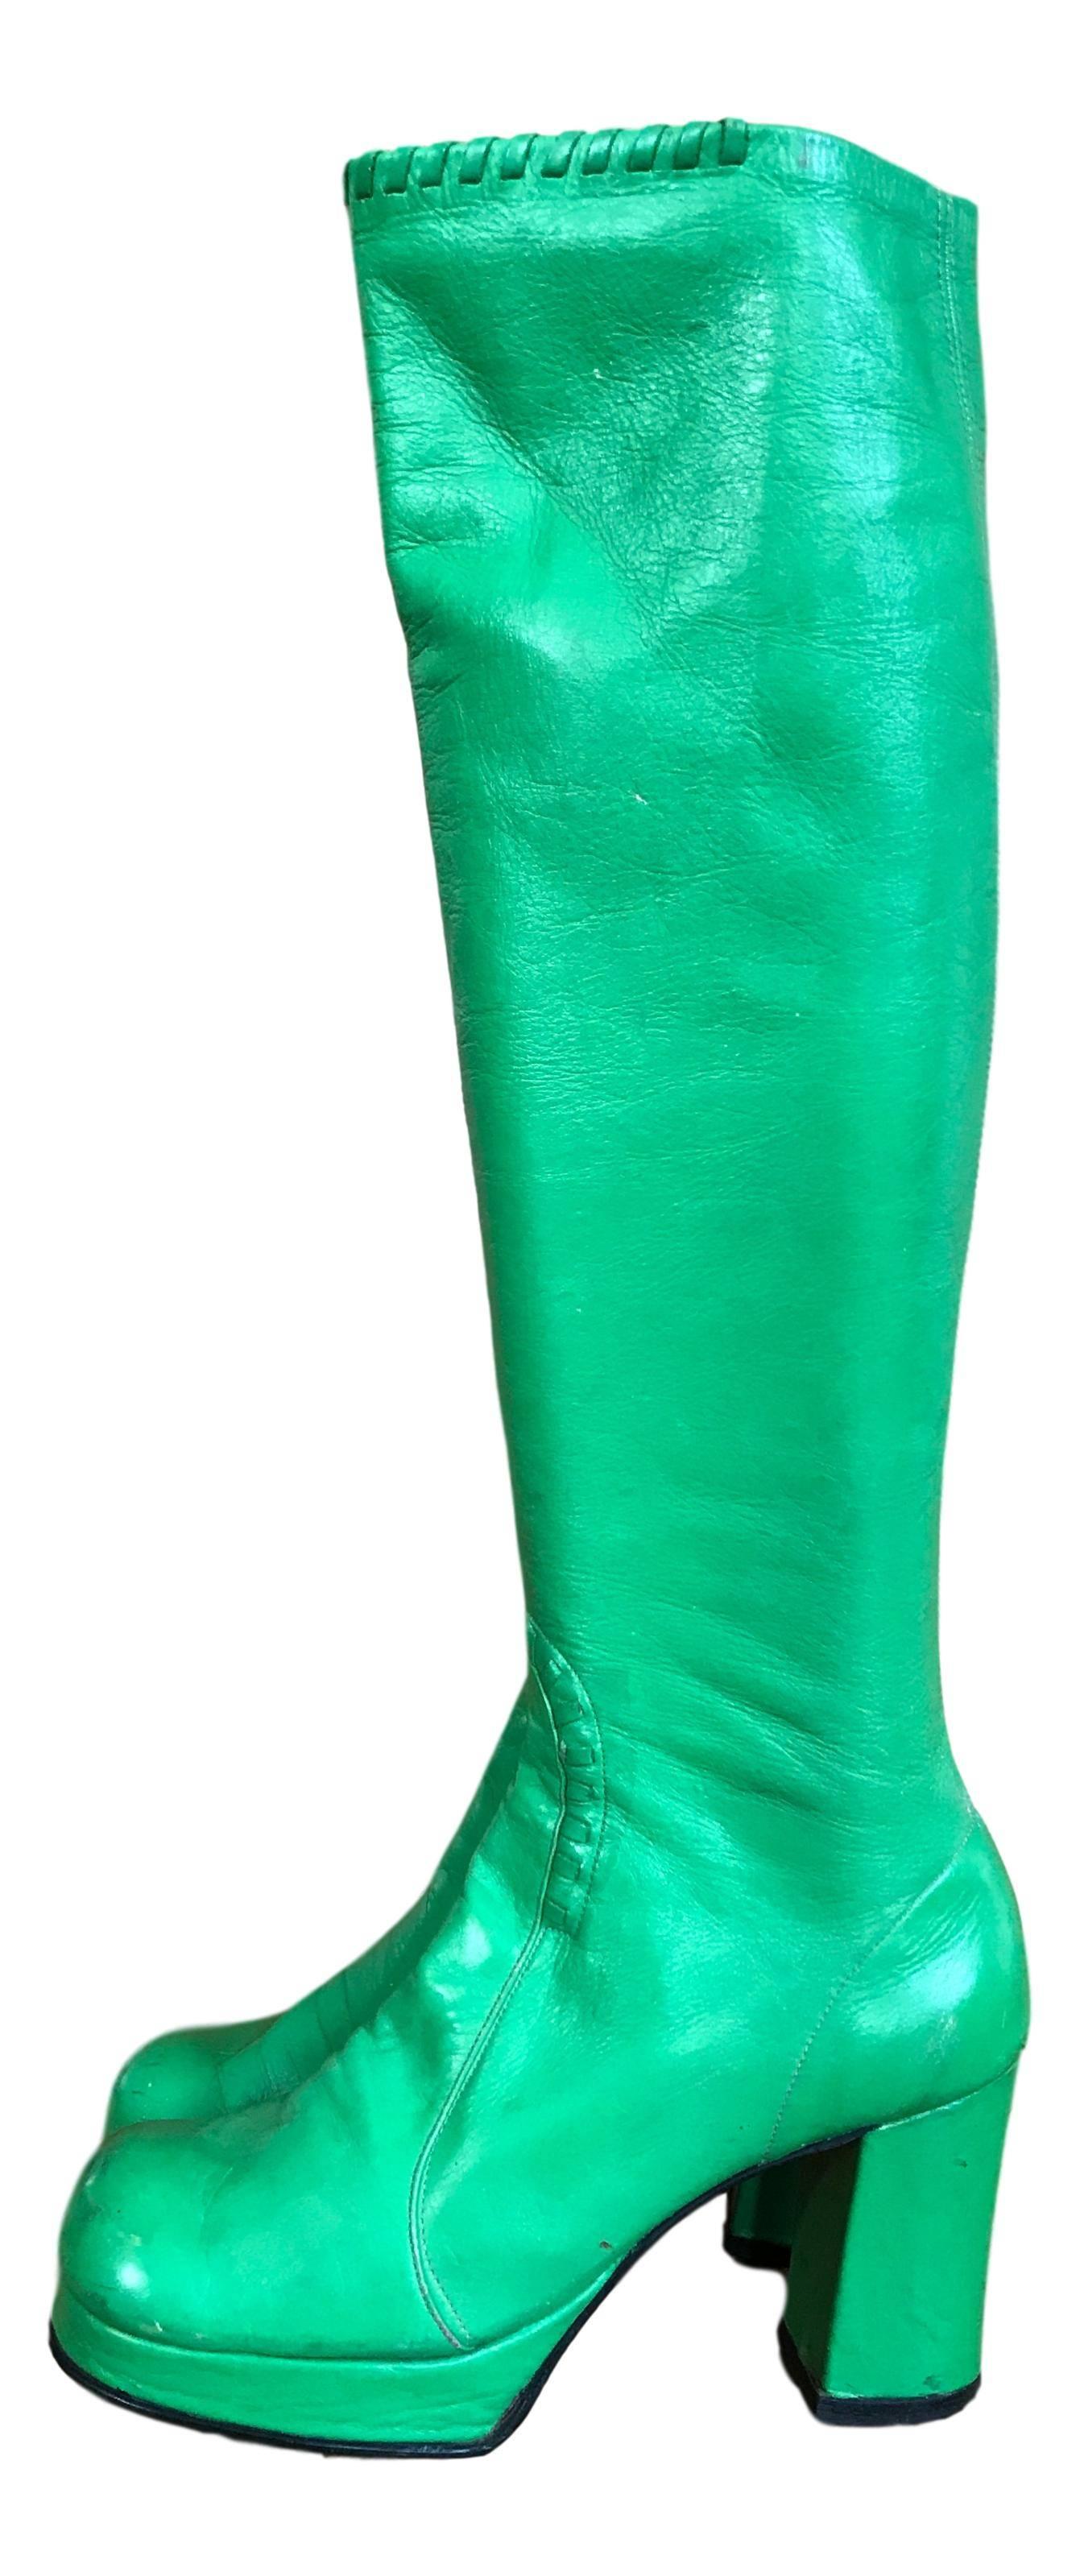 Original 1960s leather knee boots. In a bright green soft real leather. With side fasten and 3 inch block heel. 

Size UK 5 

Excellent condition